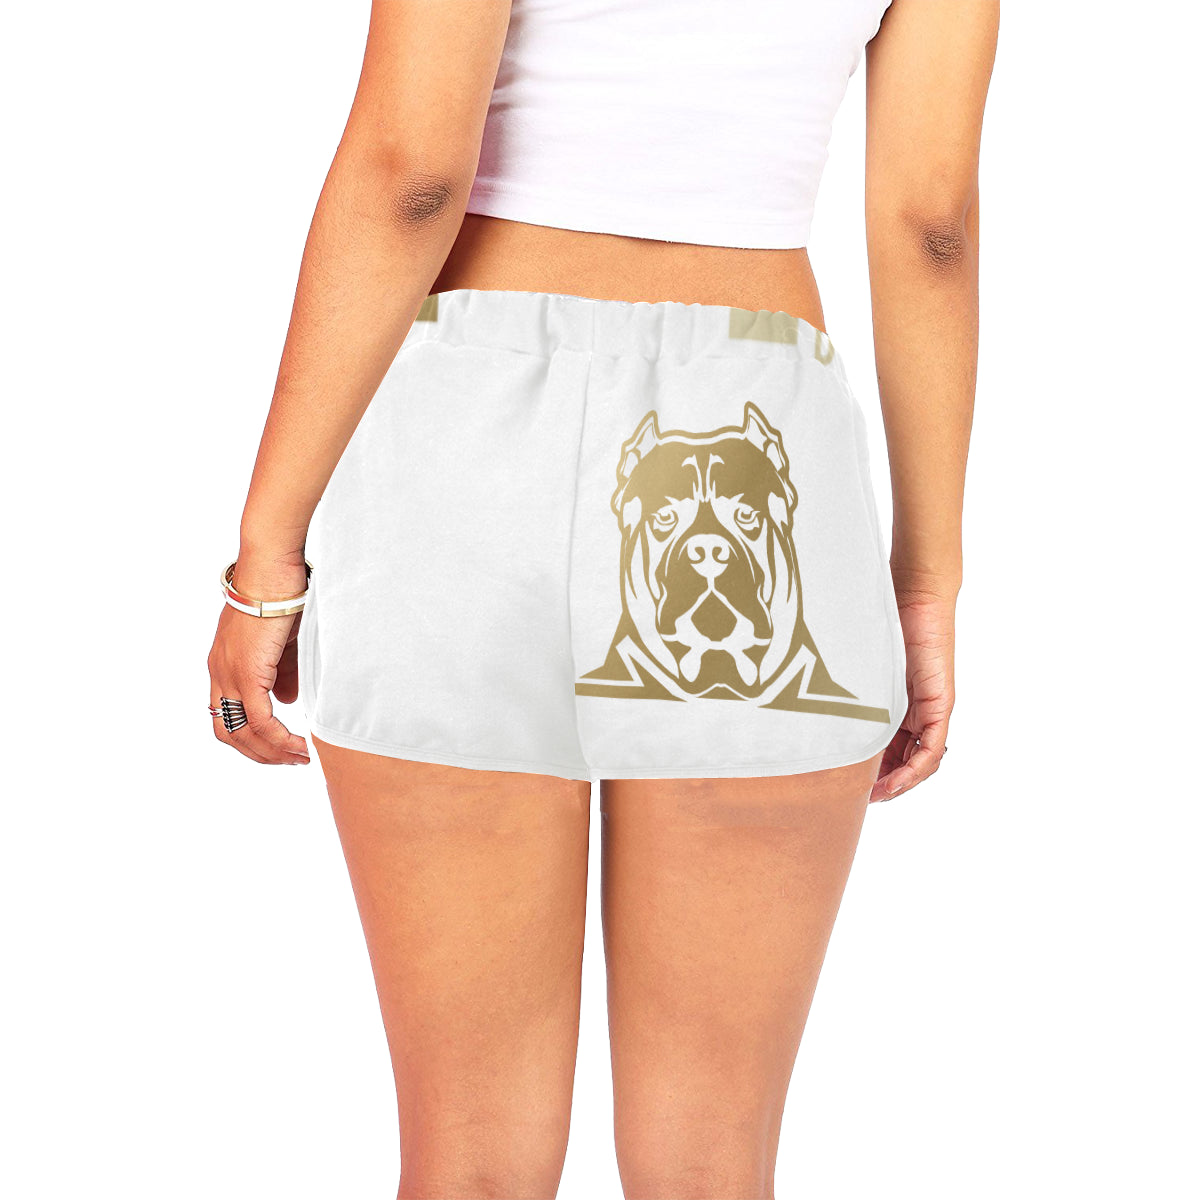 Women's White and Gold Shorts